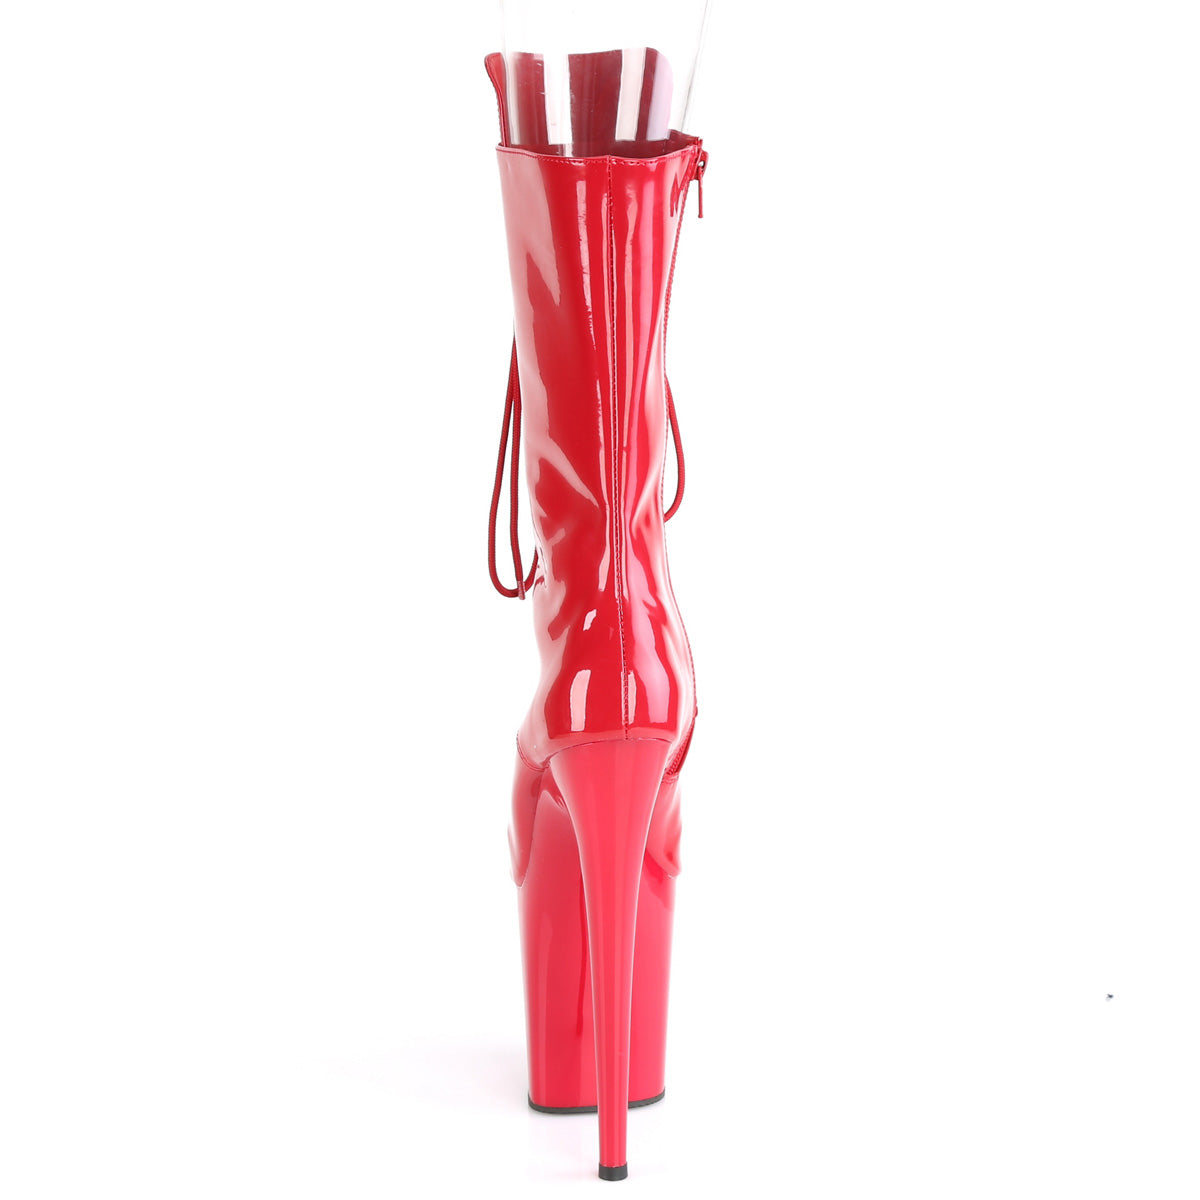 FLAMINGO-1051 / R / M 8 "PLEASER FAST DELIVERY 24-48h 